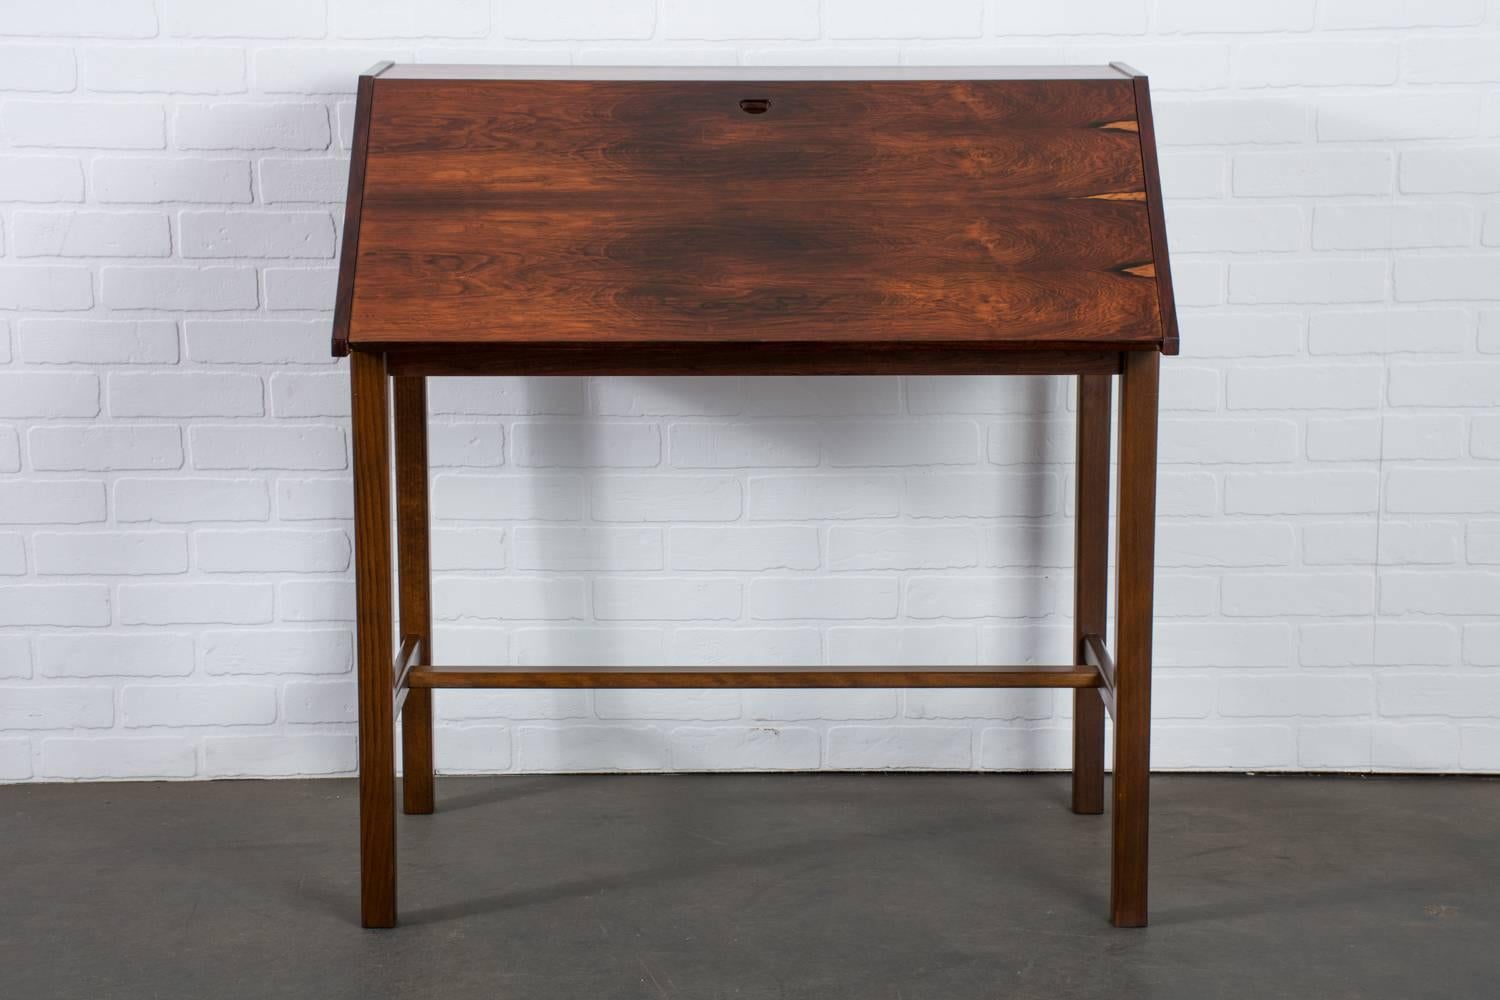 This Scandinavian modern rosewood desk has a folding top, perfect for concealing the contents or for compact spaces. Inside the desk there are two drawers and shelves. This vintage Mid-Century desk is finished on the back with beautiful grain